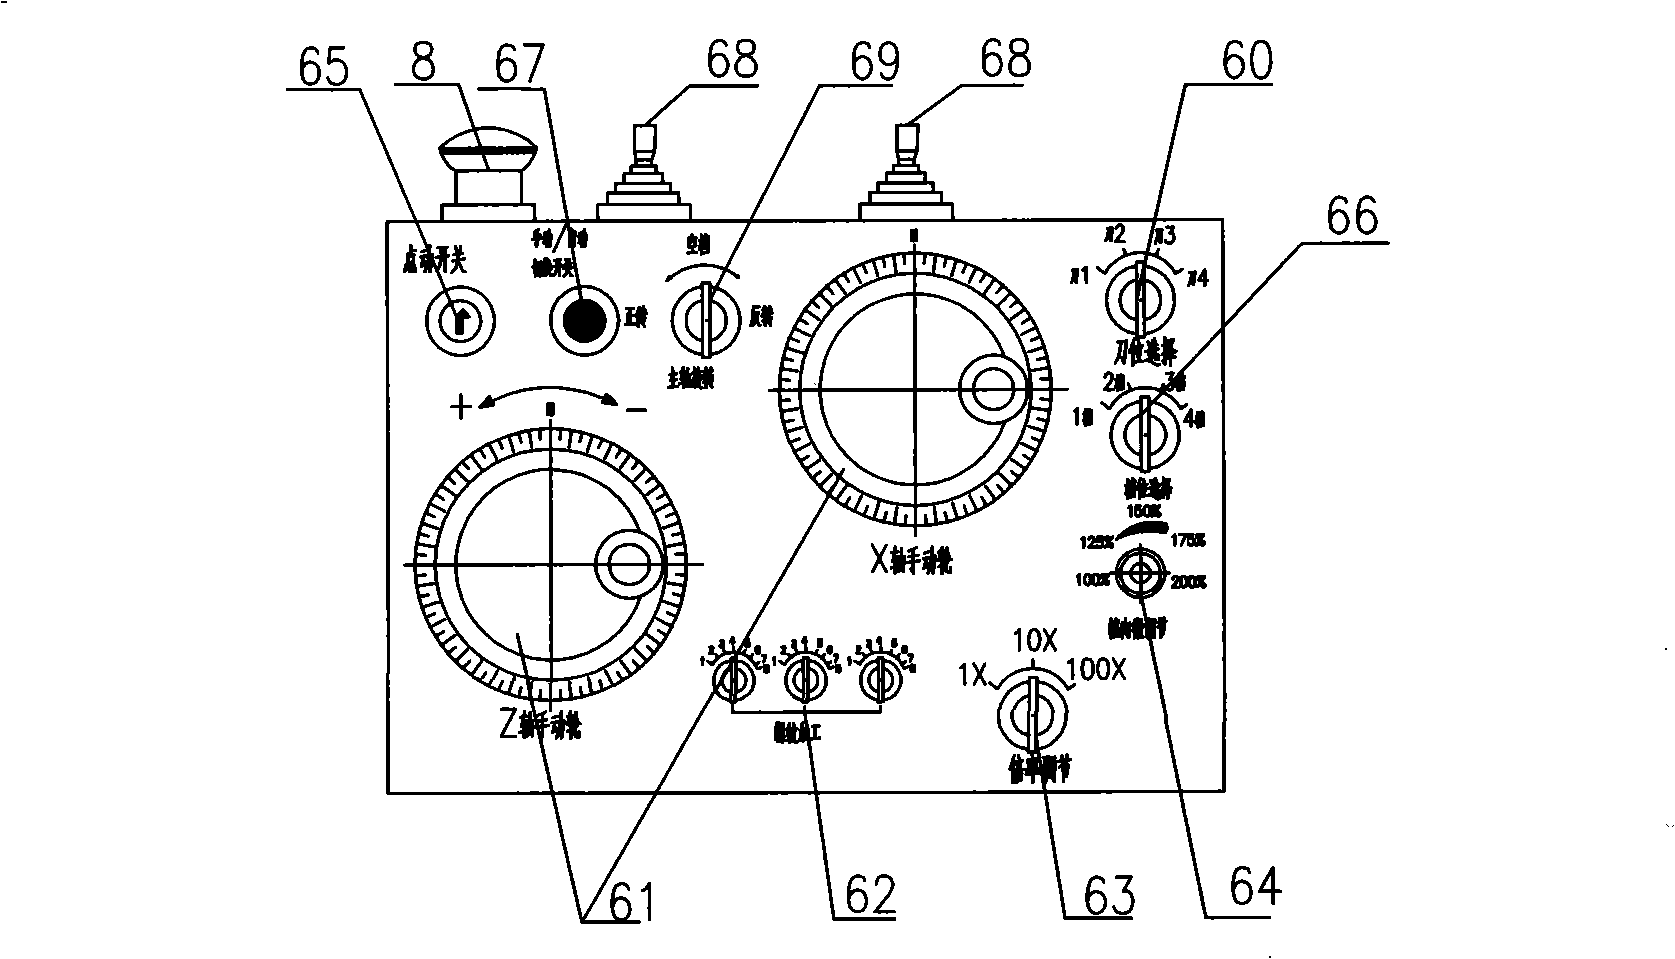 Digital-control and general lathe